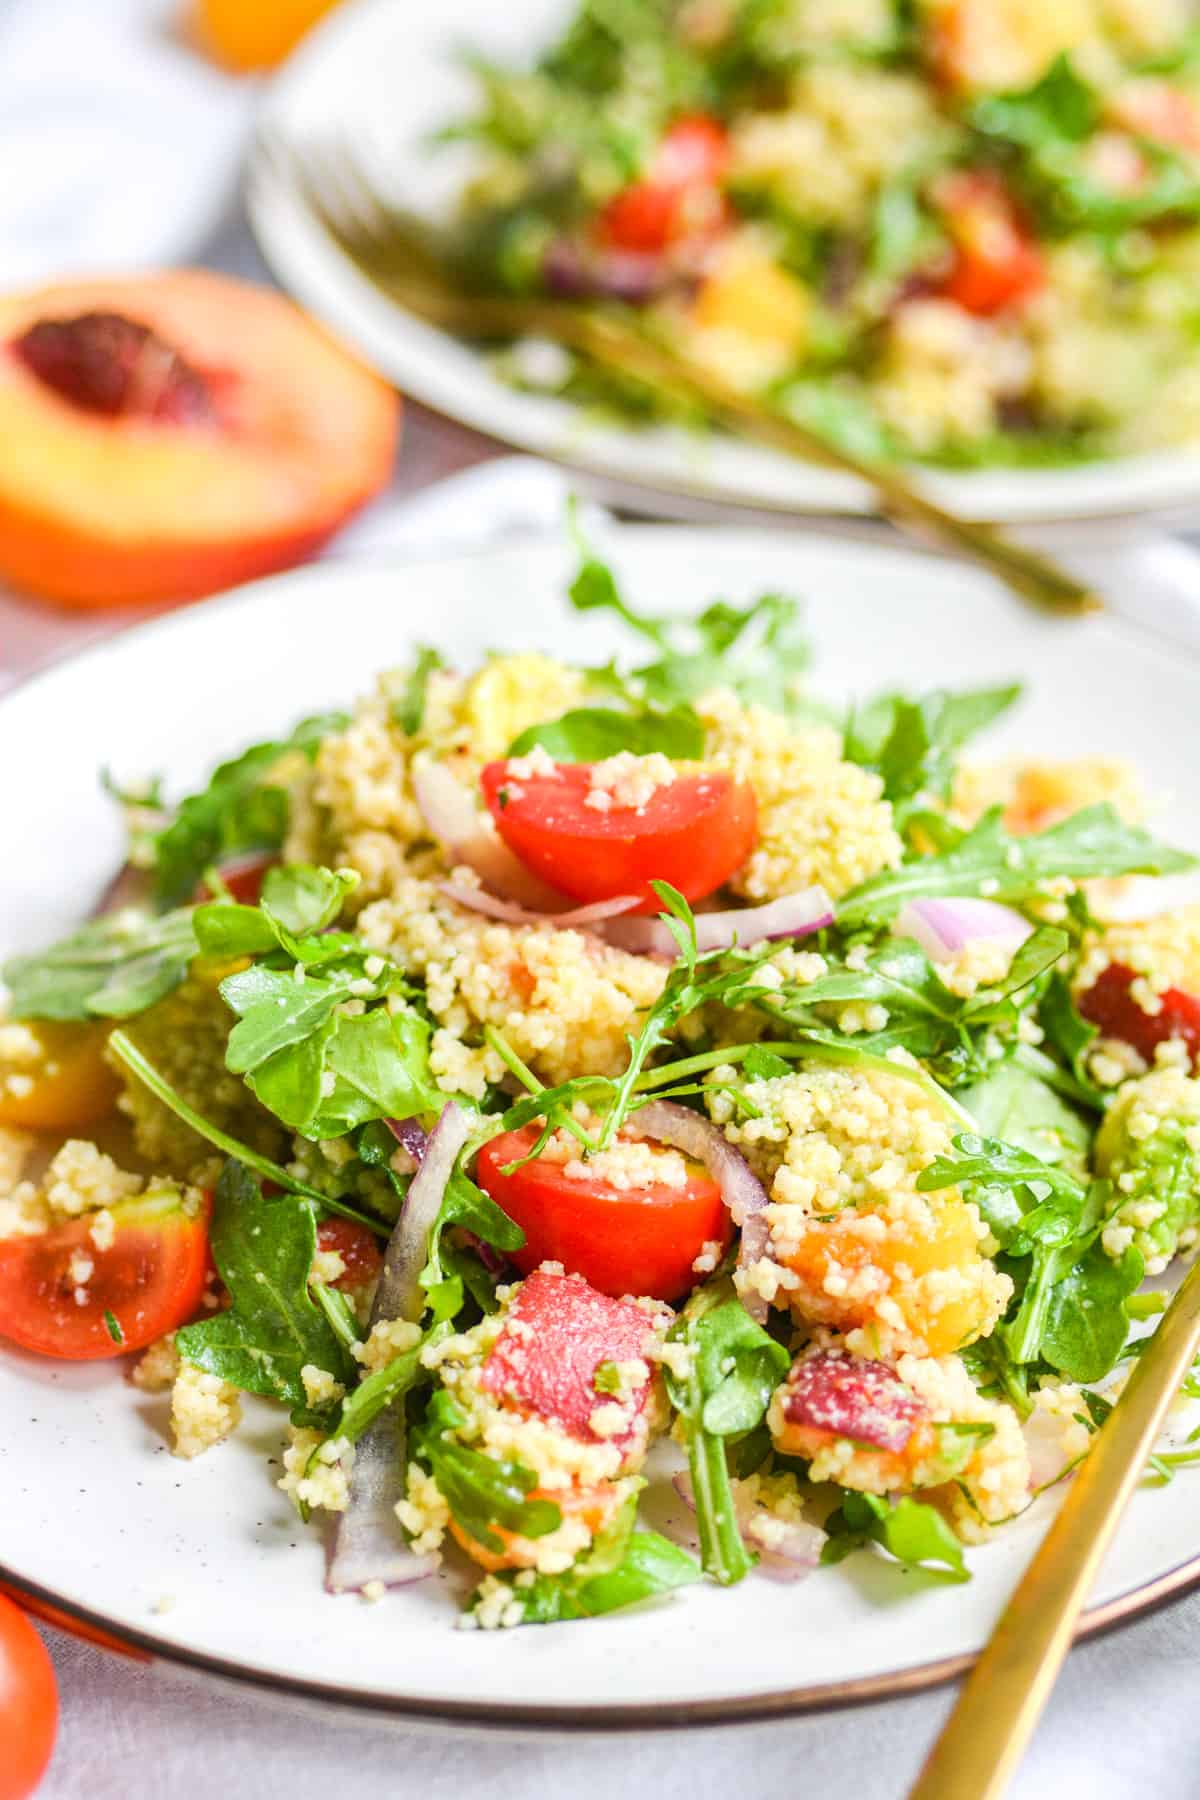 Vegan Couscous salad with nectarine and arugula on a plate